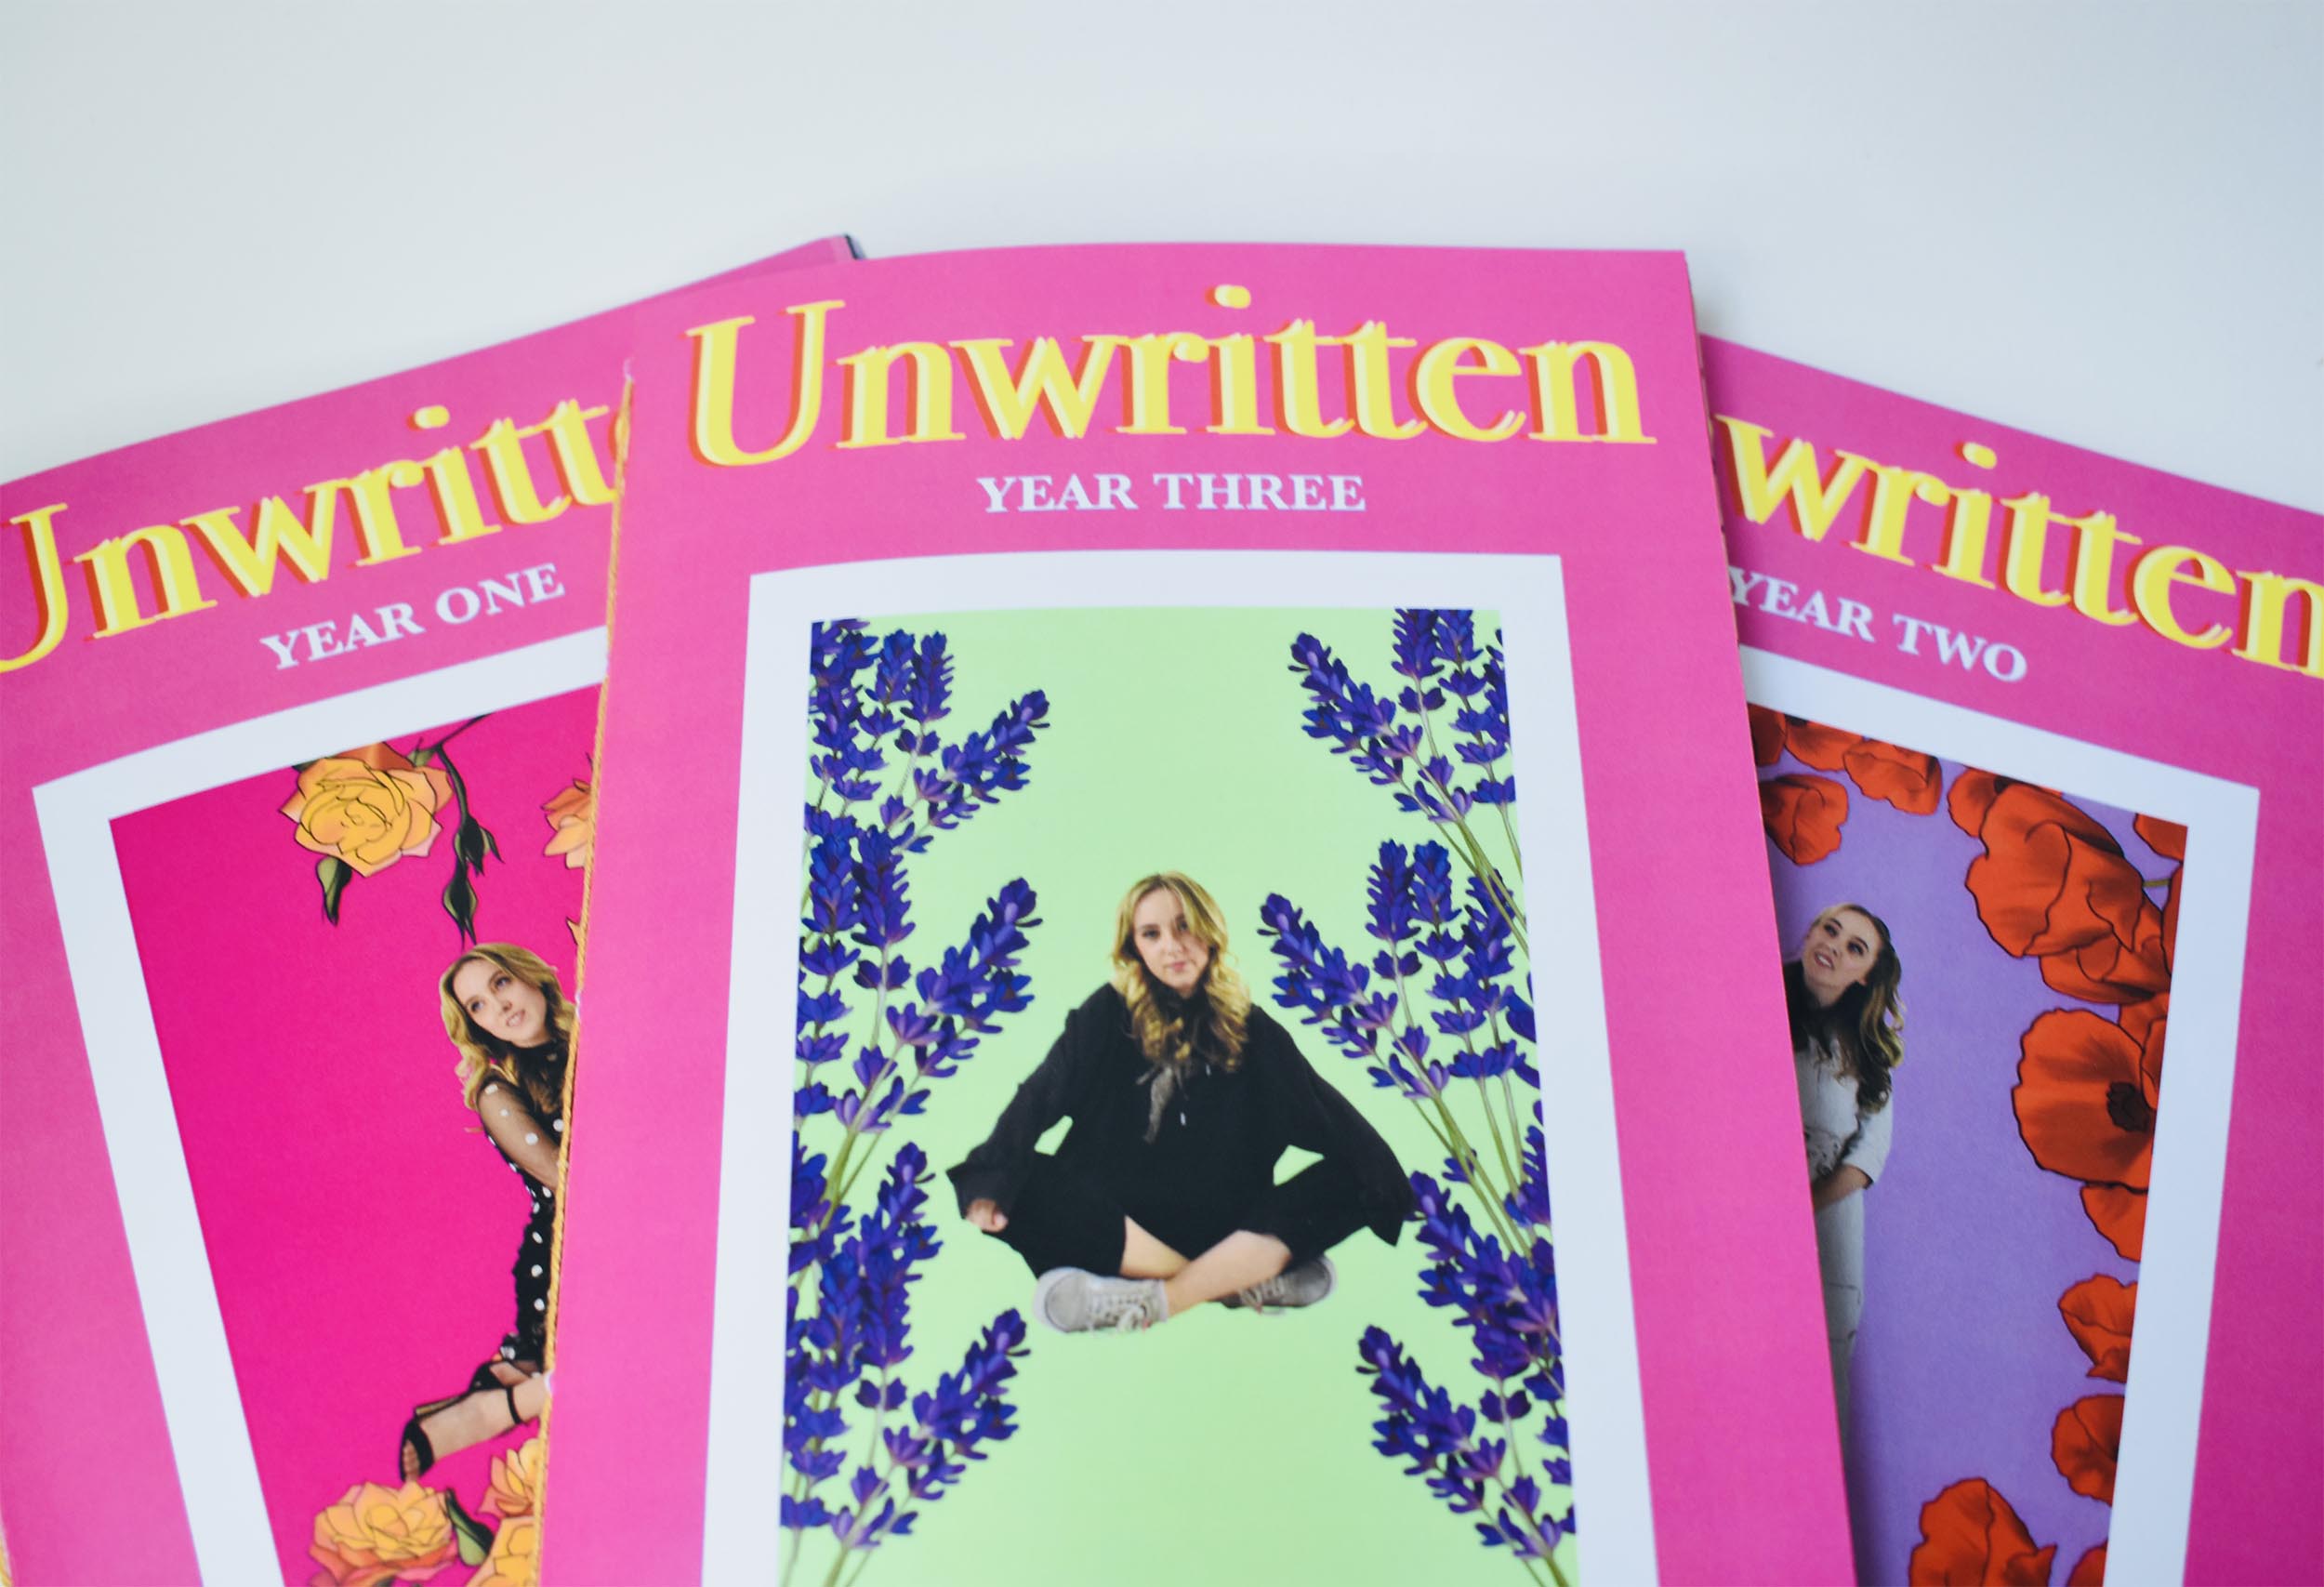 Three Zine covers spread out displaying a bright pink background and yellow font. Each zine has a different image of a girl surrounded by illustrated flowers.